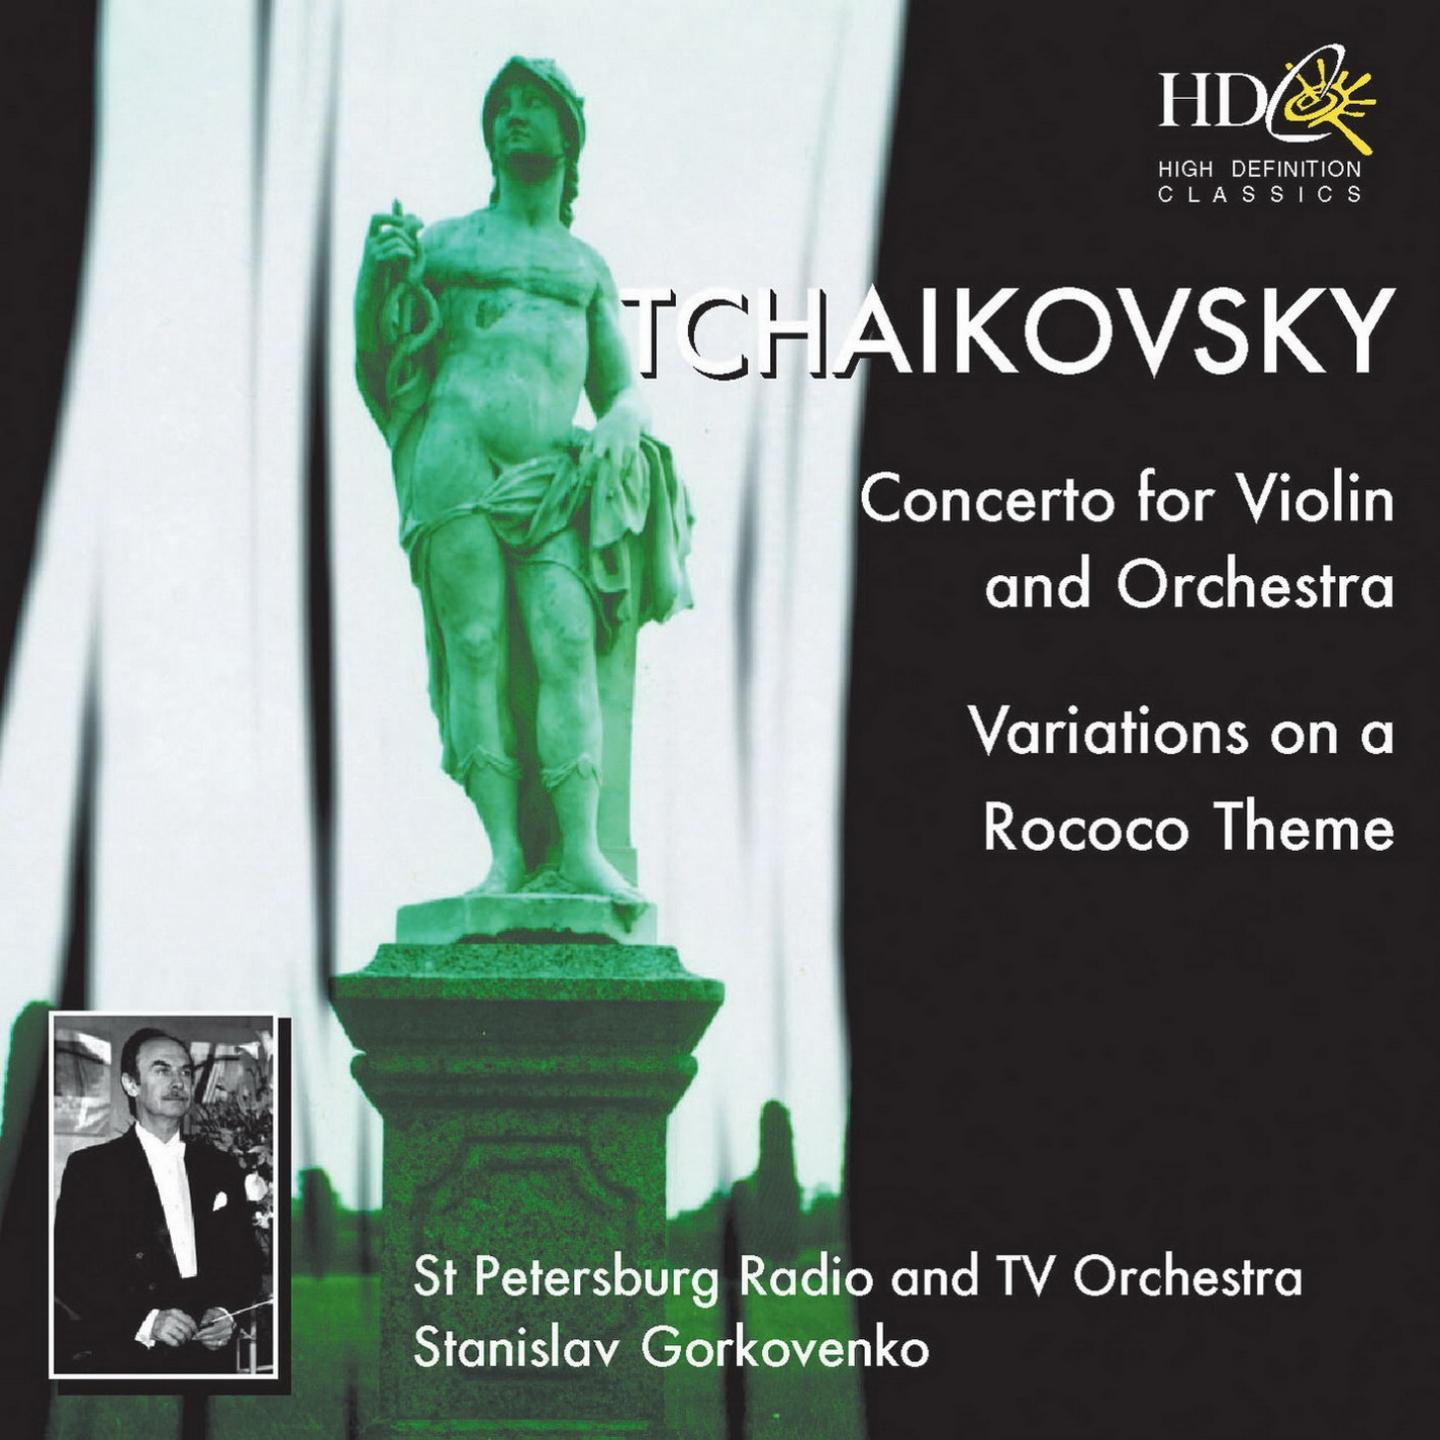 Concerto for Violin and Orchestra in D Major, Op.35 ; Variations on a Rococo Theme, Op.33